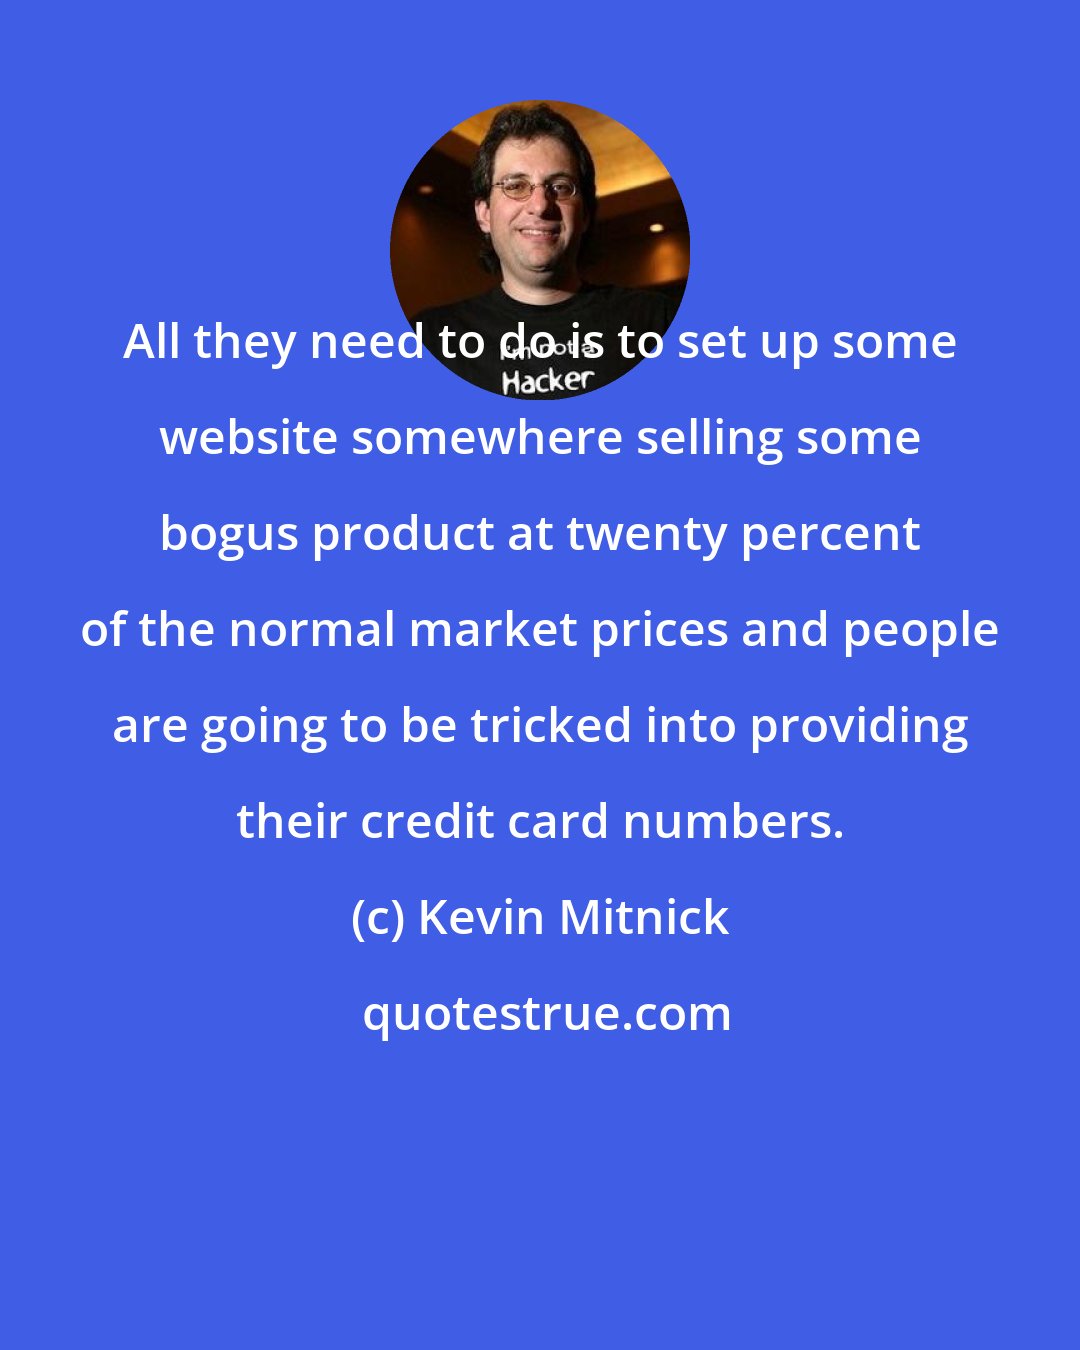 Kevin Mitnick: All they need to do is to set up some website somewhere selling some bogus product at twenty percent of the normal market prices and people are going to be tricked into providing their credit card numbers.